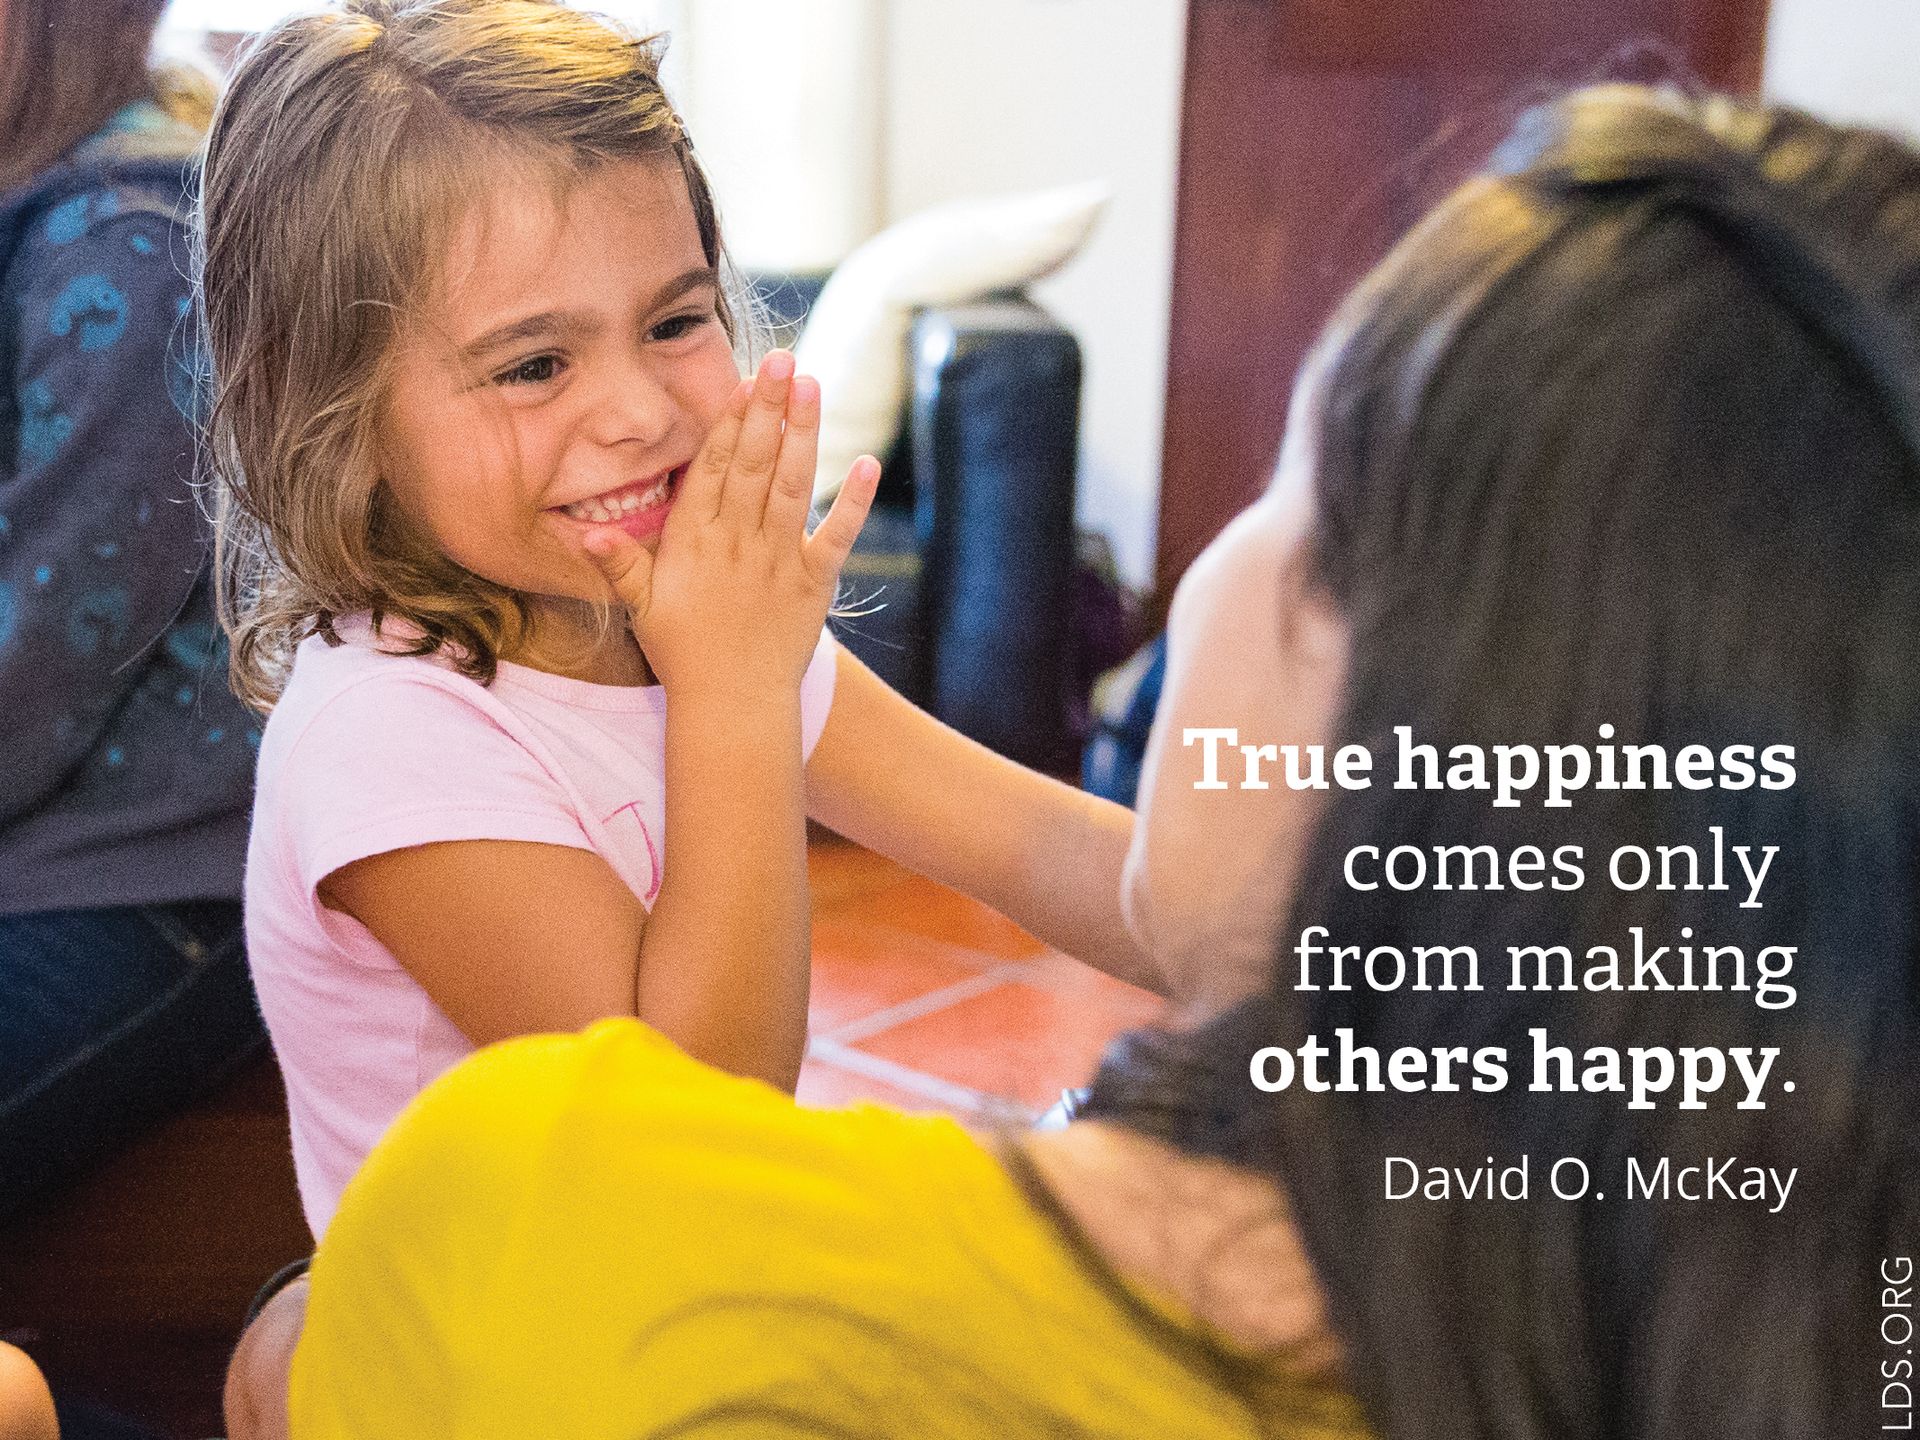 “True happiness comes only from making others happy.”—President David O. McKay, Gospel Ideals (1953), 551